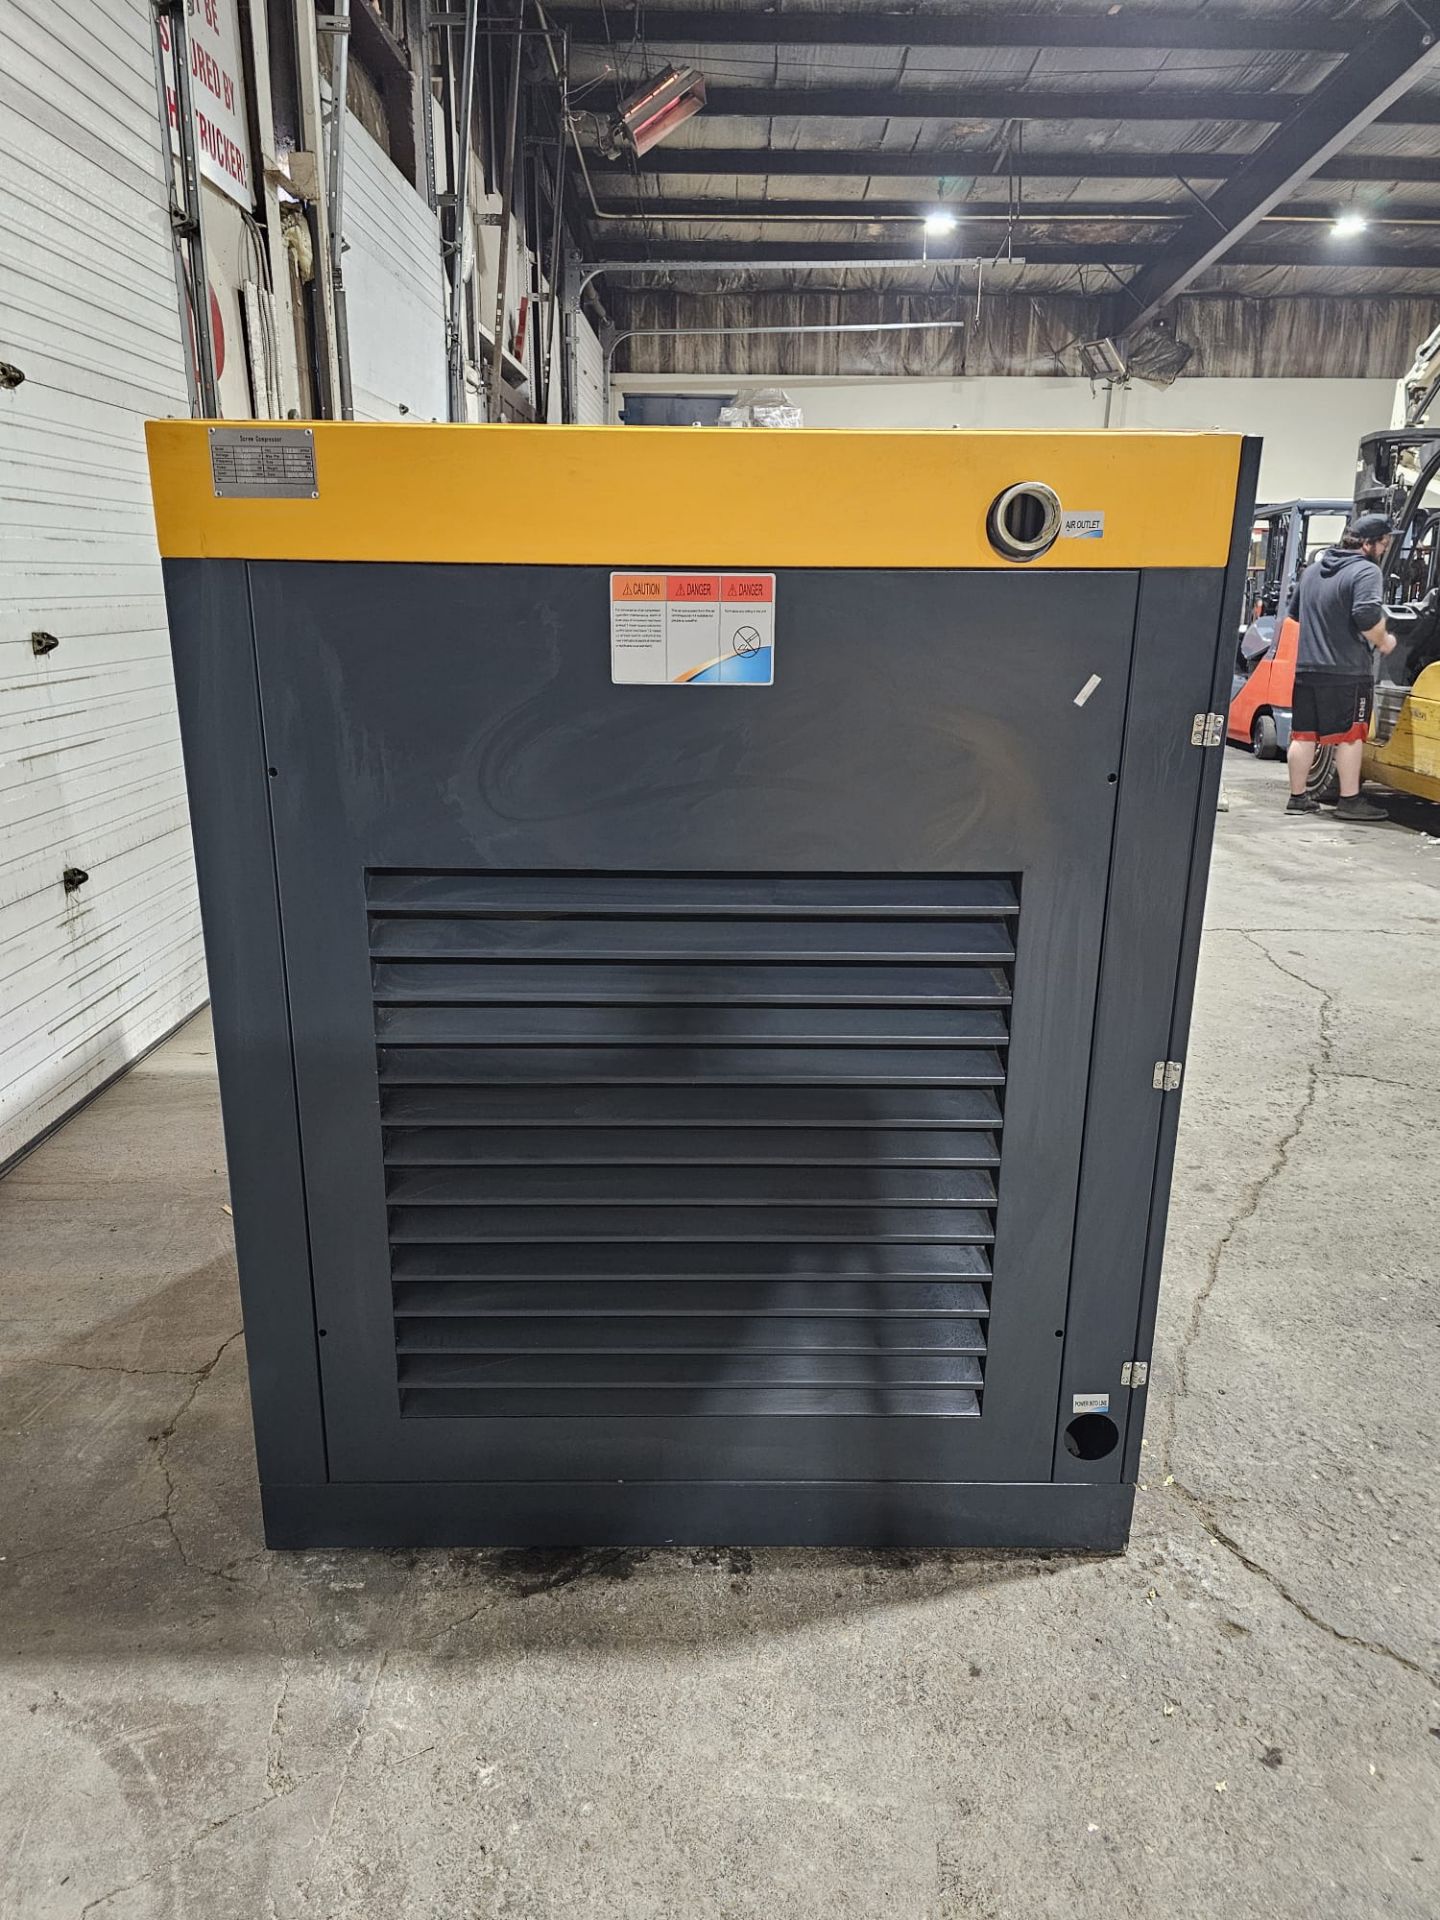 Airtec 100HP Rotary Screw Air Compressor - Electrical Issues with this compressor - Image 5 of 5